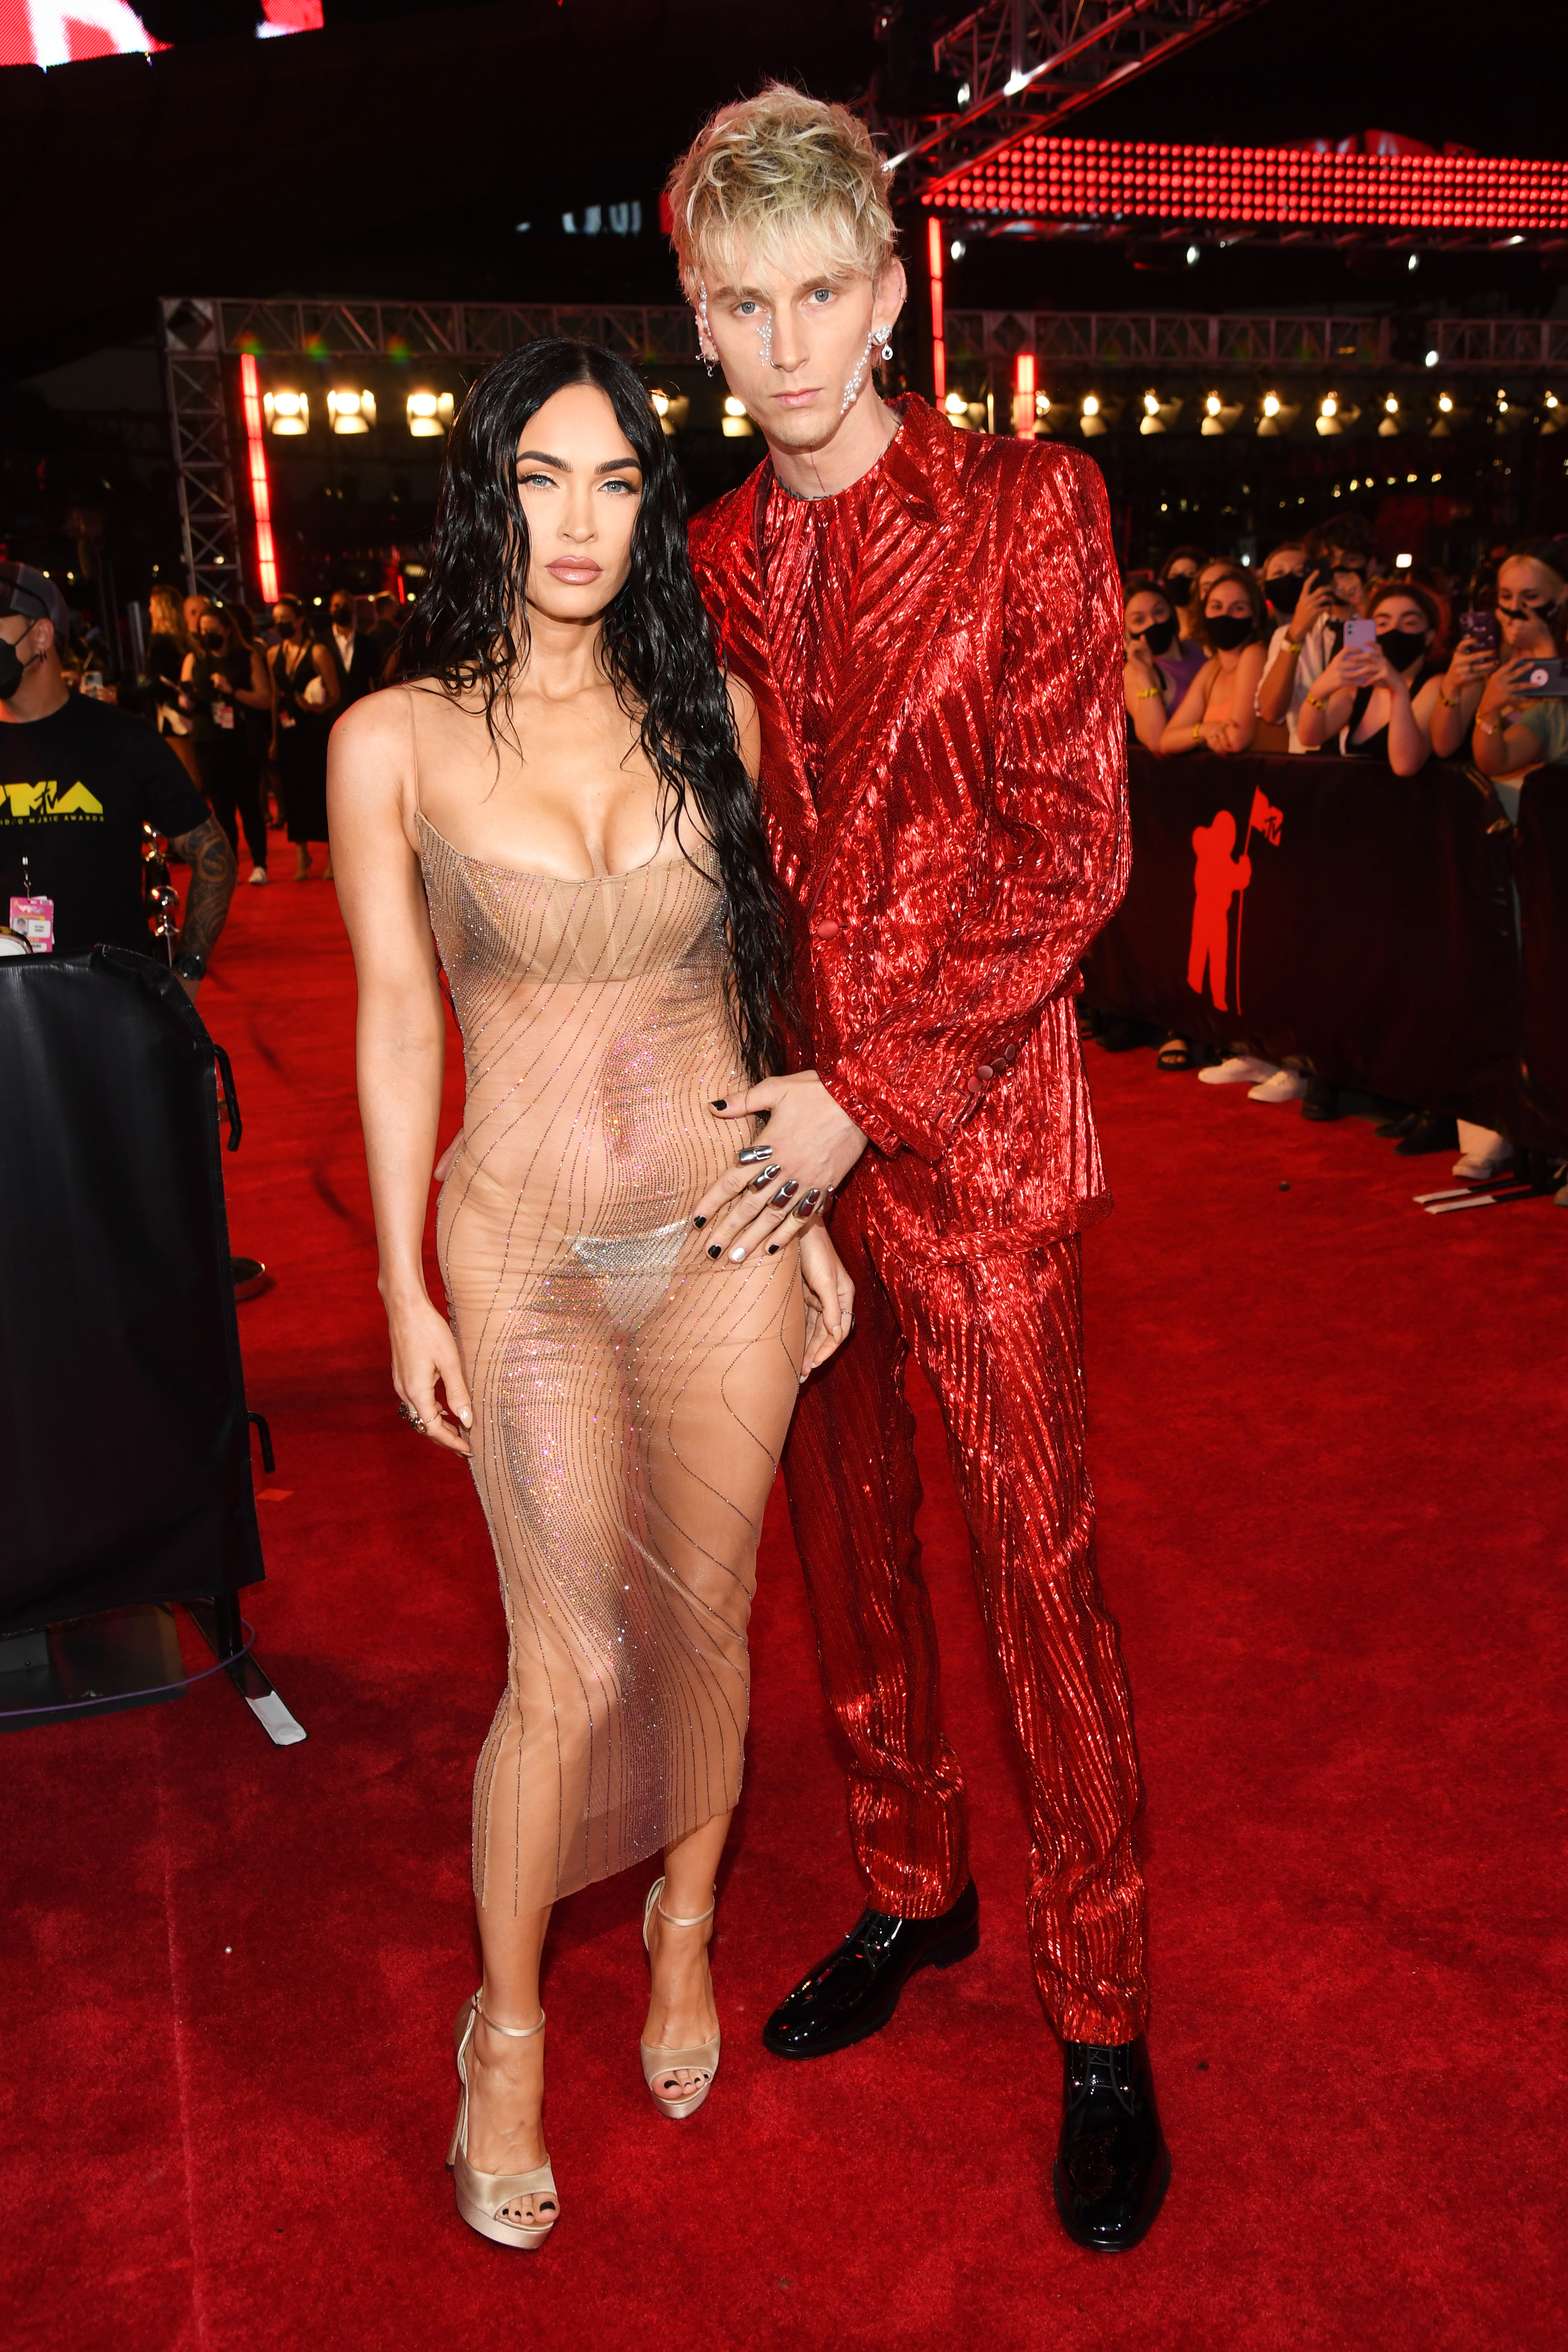 The pair posing on the red carpet, Megan in a sheer, figure-hugging dress and MGK in a shiny, textured suit